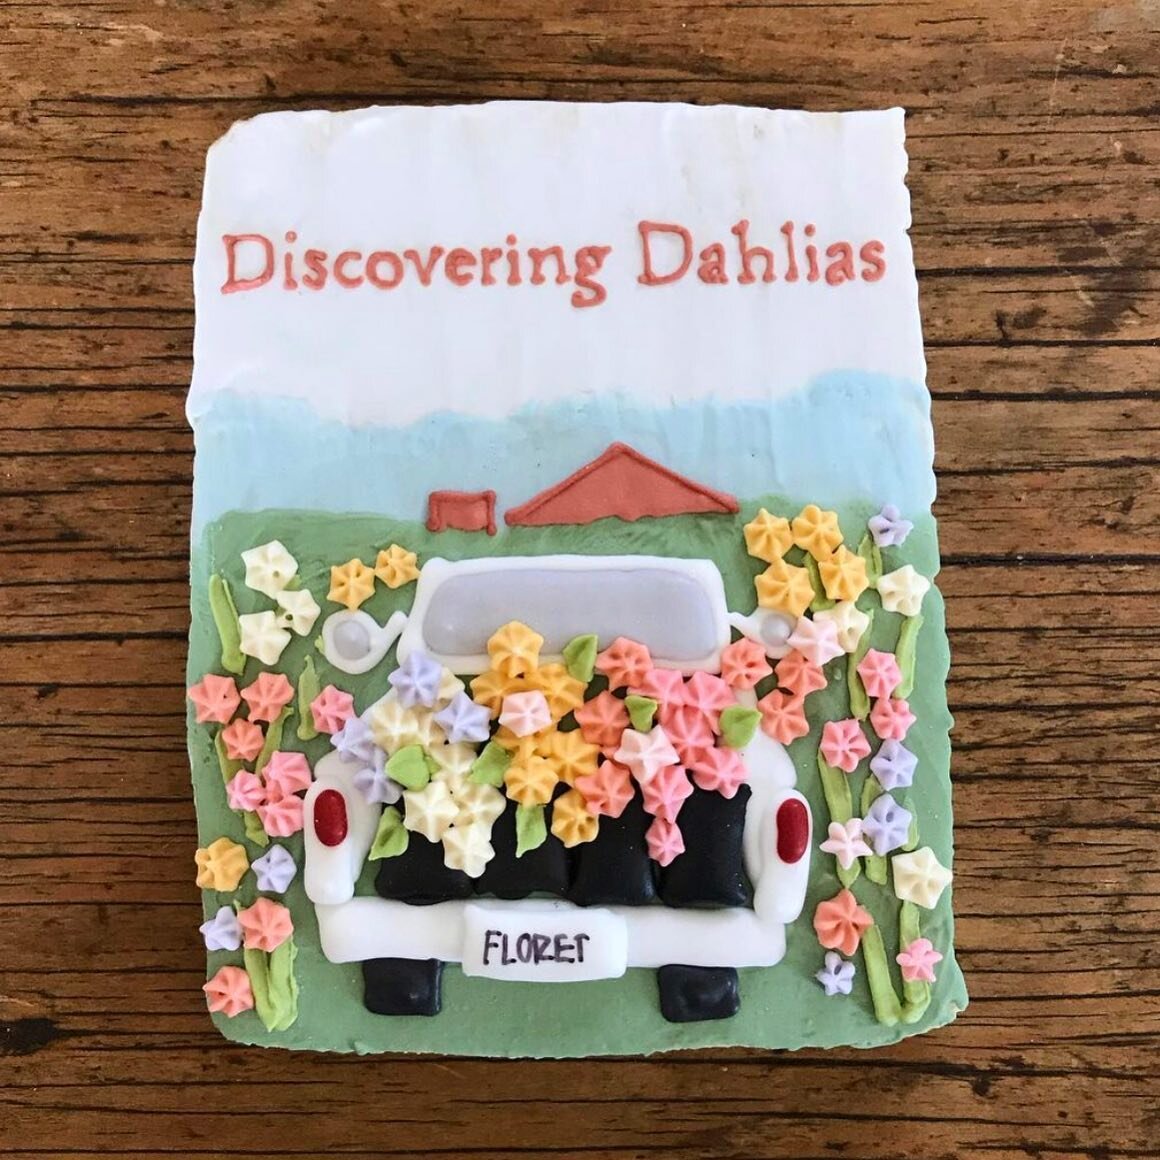 Can you believe this adorable cookie by @morgan_g_co in celebration of the publication of #discoveringdahlias? She creates the most beautiful confections for @floretflower book launches that match each cover! #wwllt @chroniclebooks #ittakesacommunity